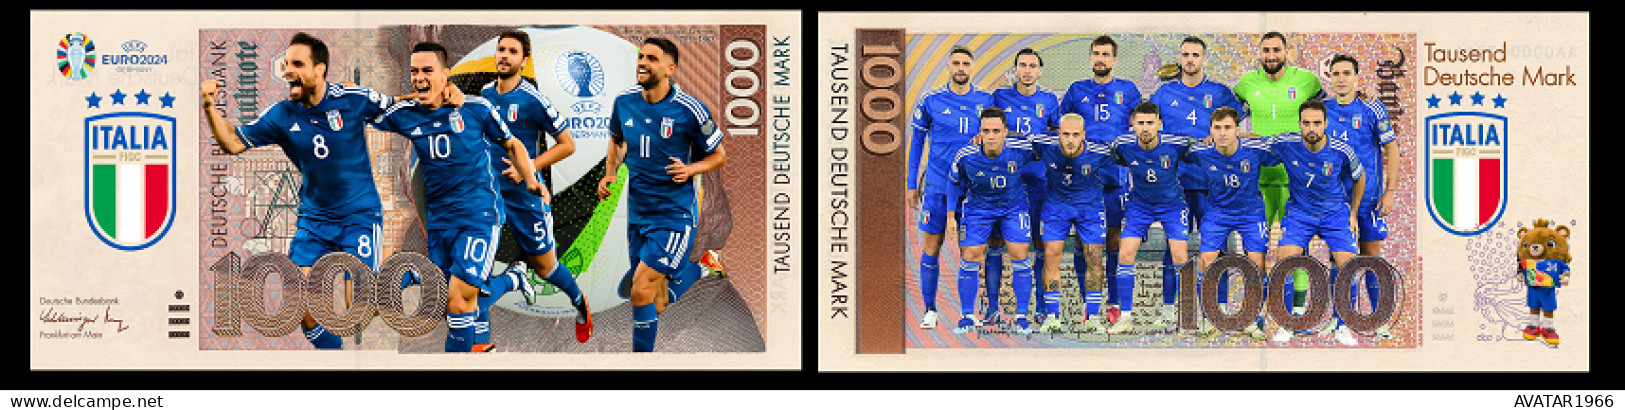 UEFA European Football Championship 2024 qualified country  Italy  8 pieces Germany fantasy paper money